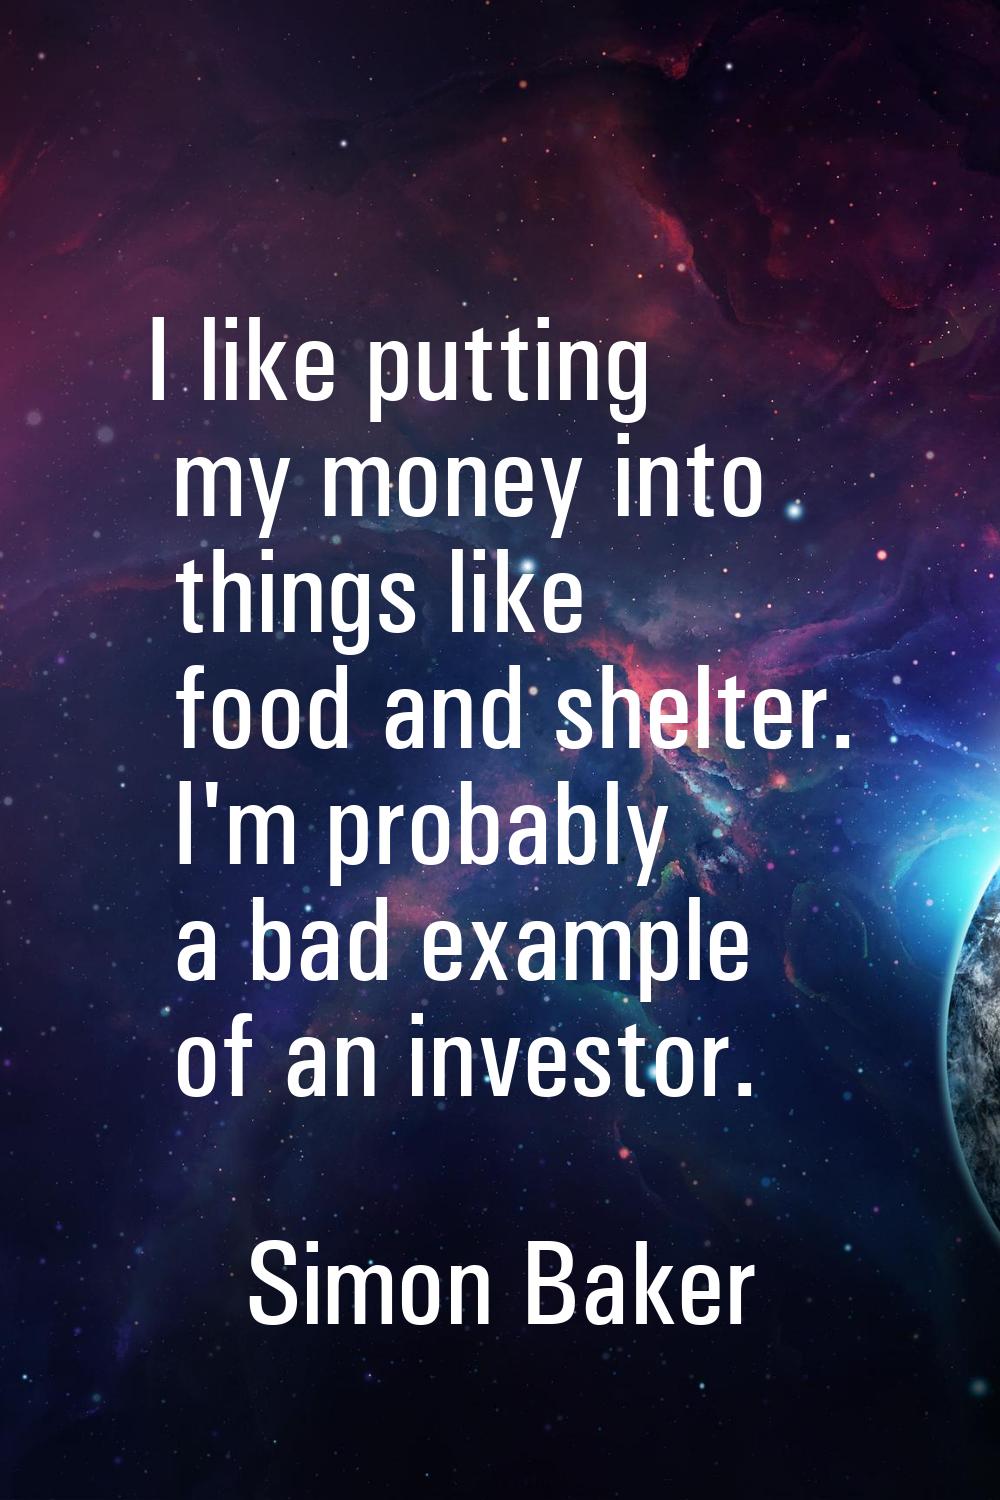 I like putting my money into things like food and shelter. I'm probably a bad example of an investo